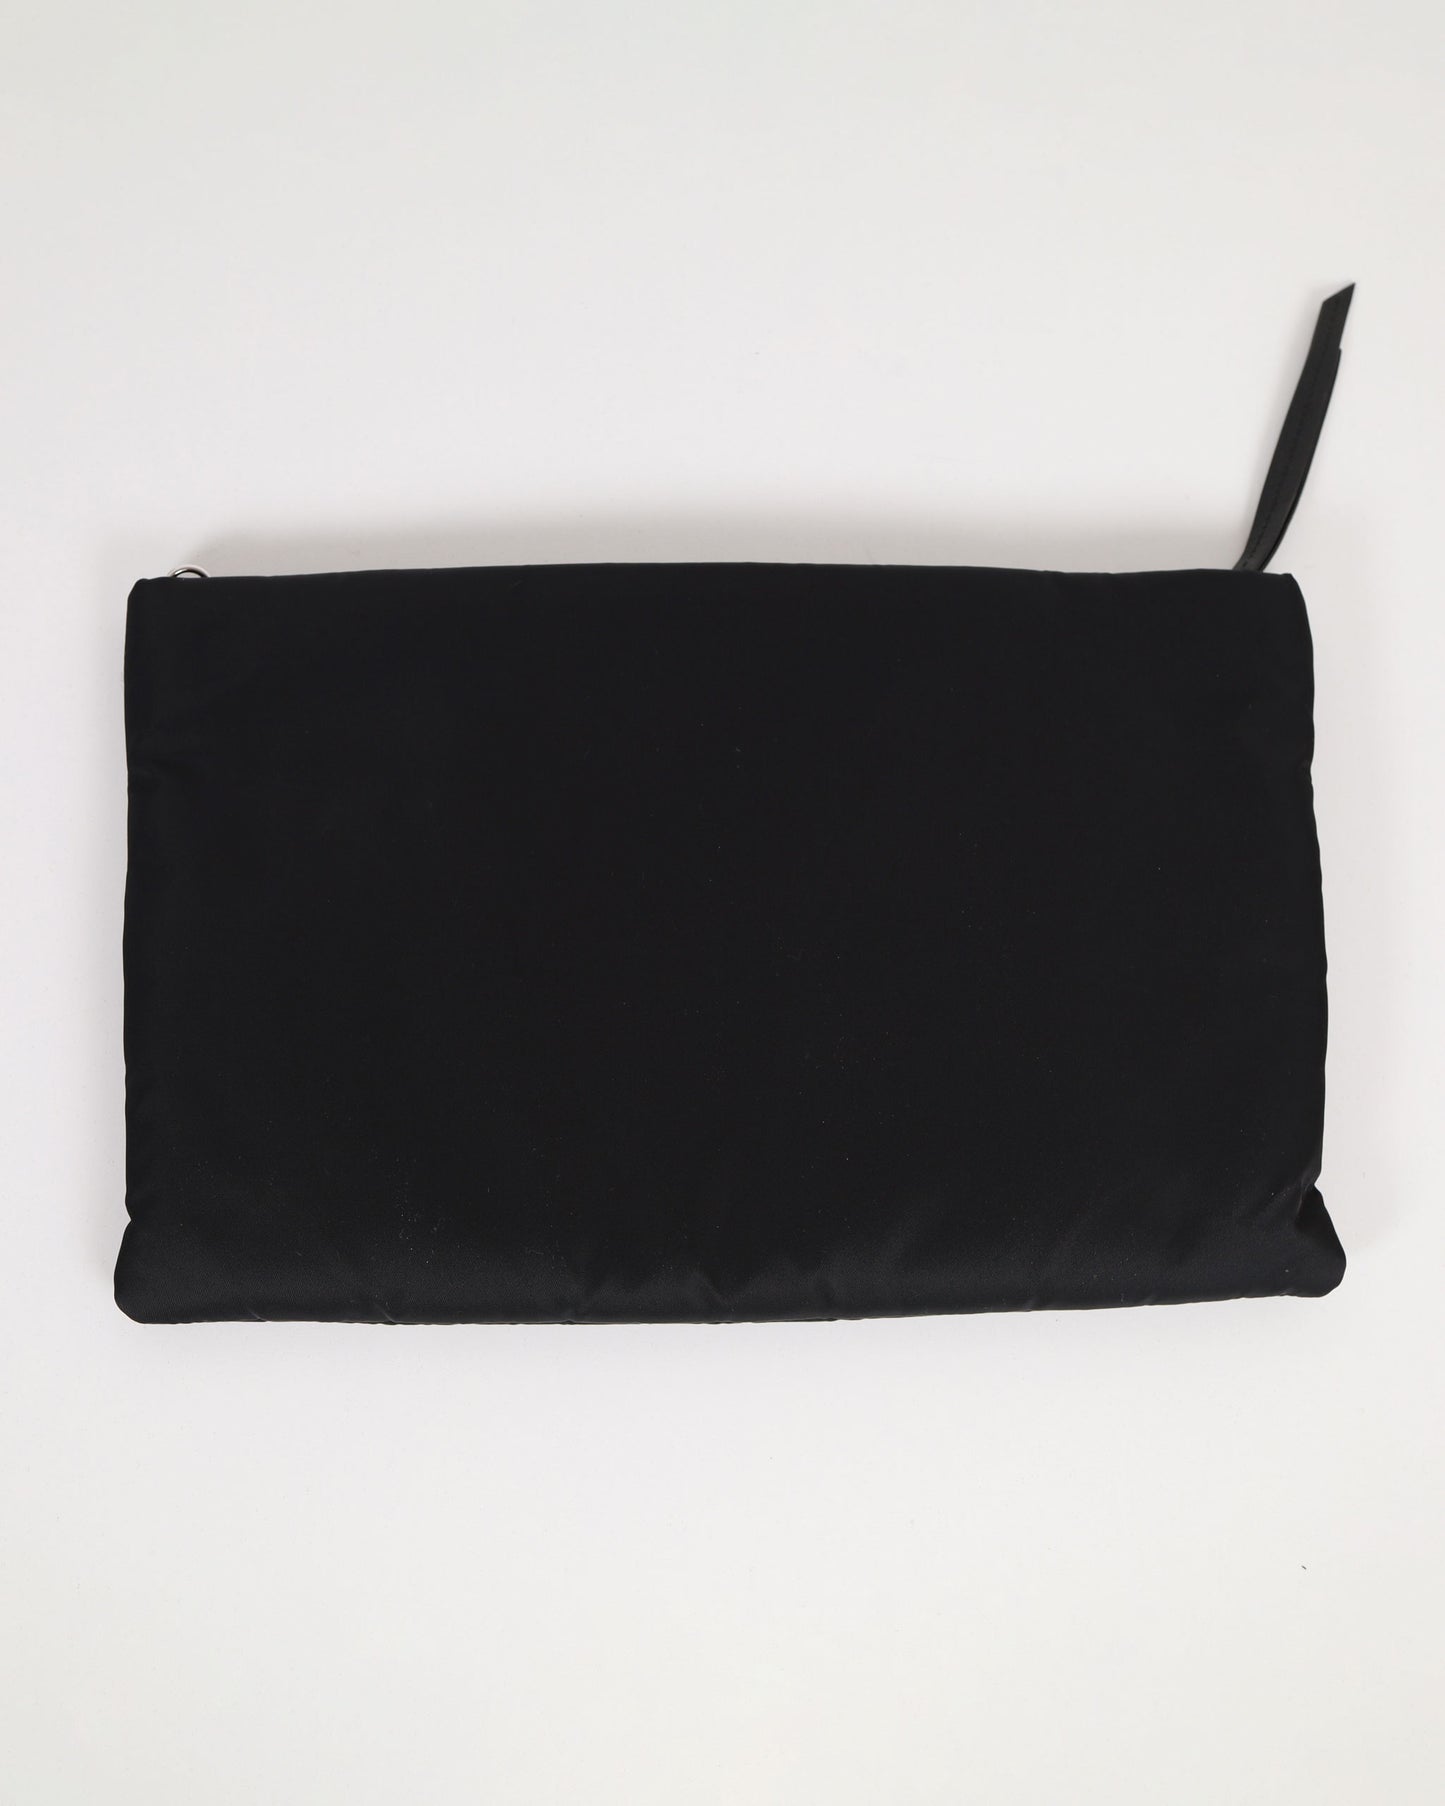 Prada Nylon Pouch with Long Chain Strap in Black